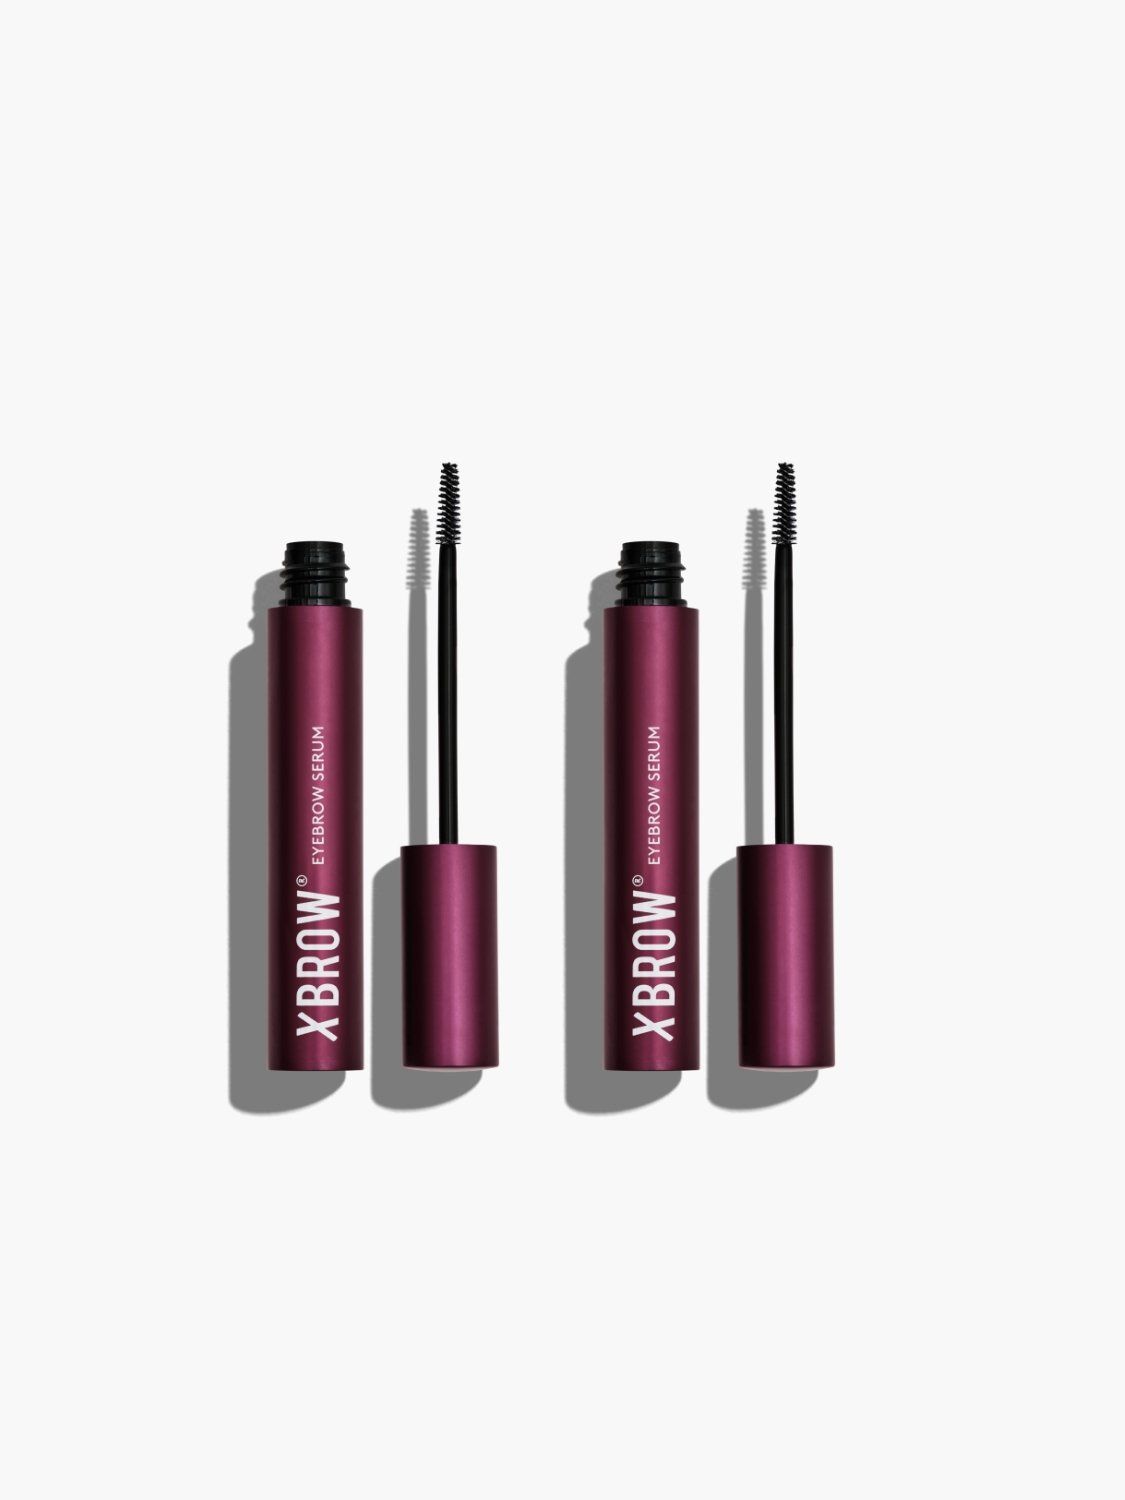 Xbrow 3ml 2-pack